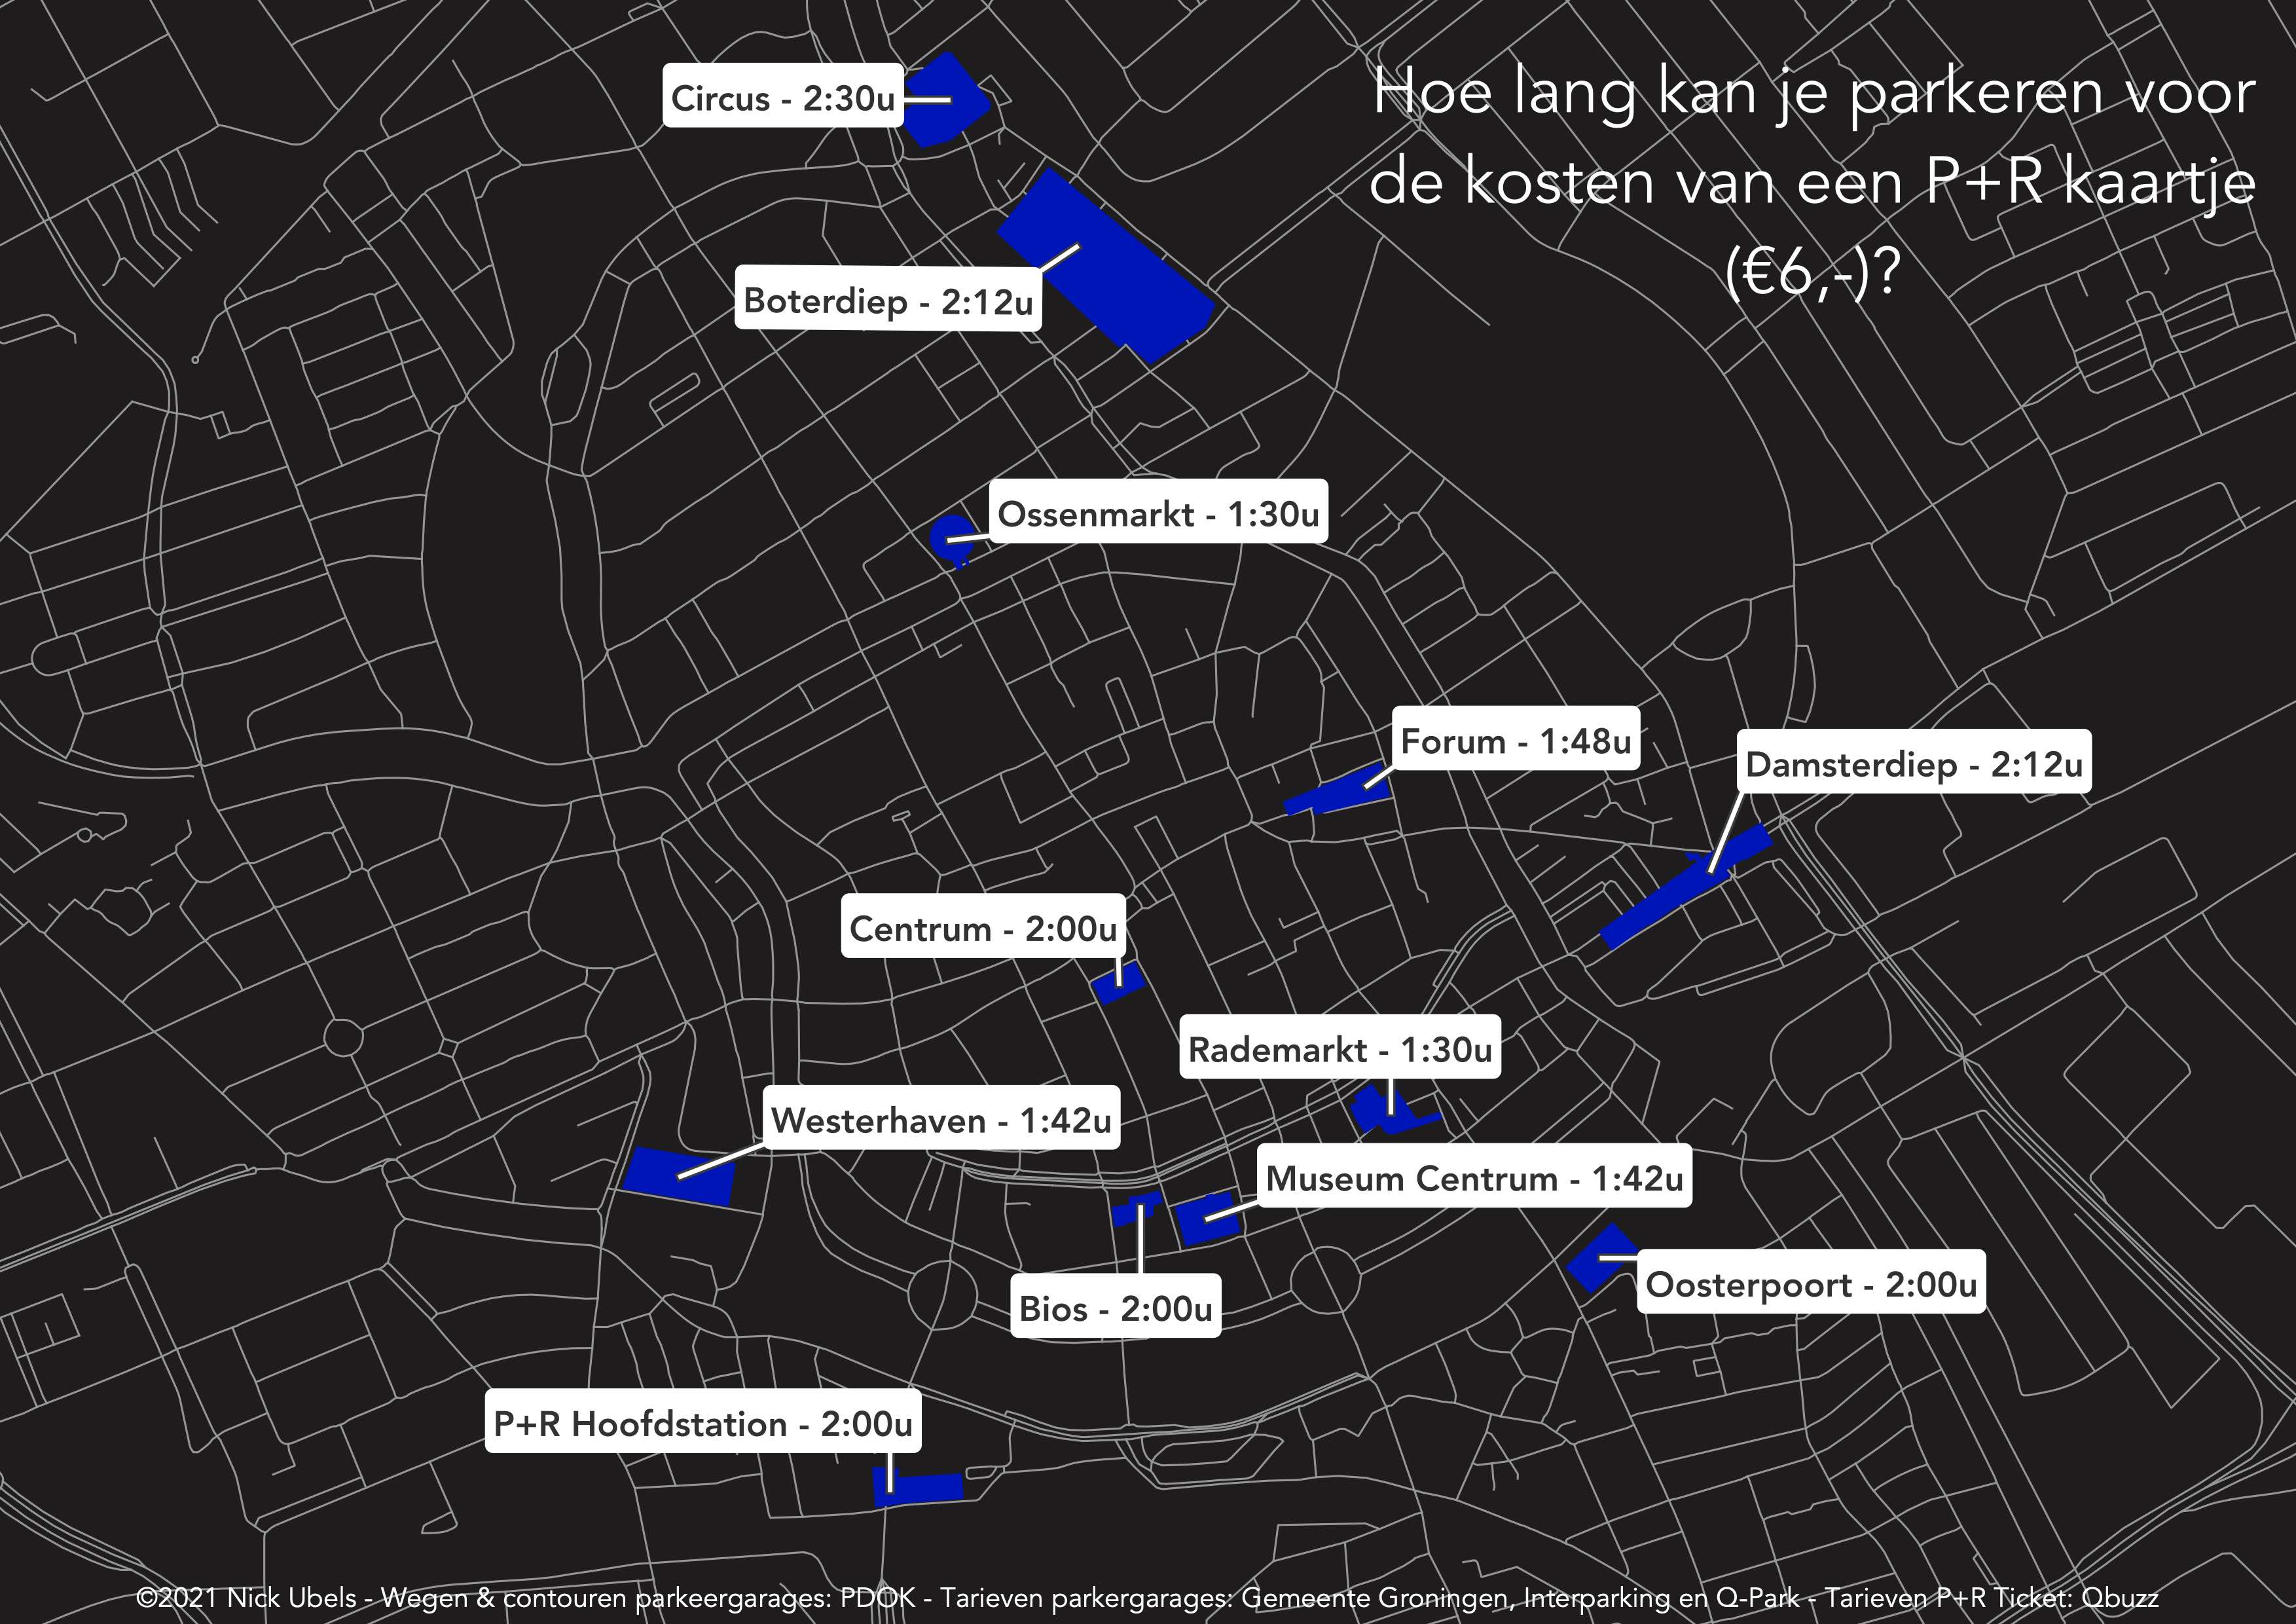 Parking costs map